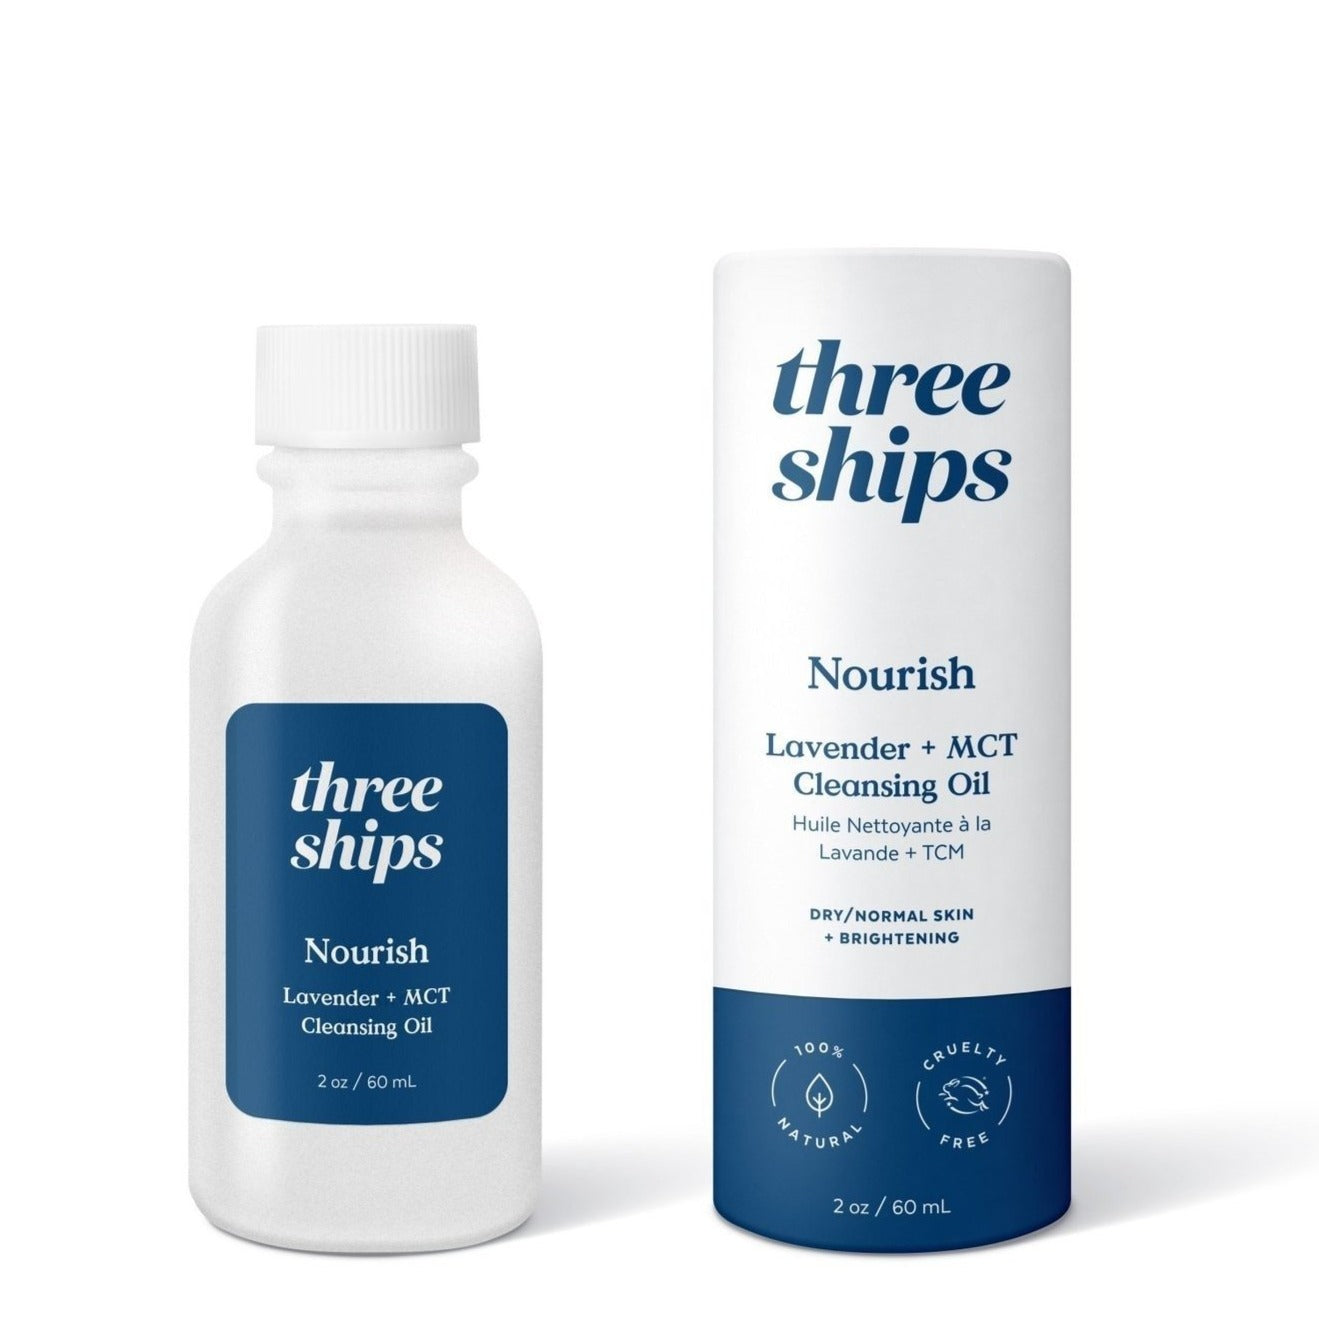 THREE SHIPS - NOURISH CLEANSING OIL IN LAVENDER + MCT